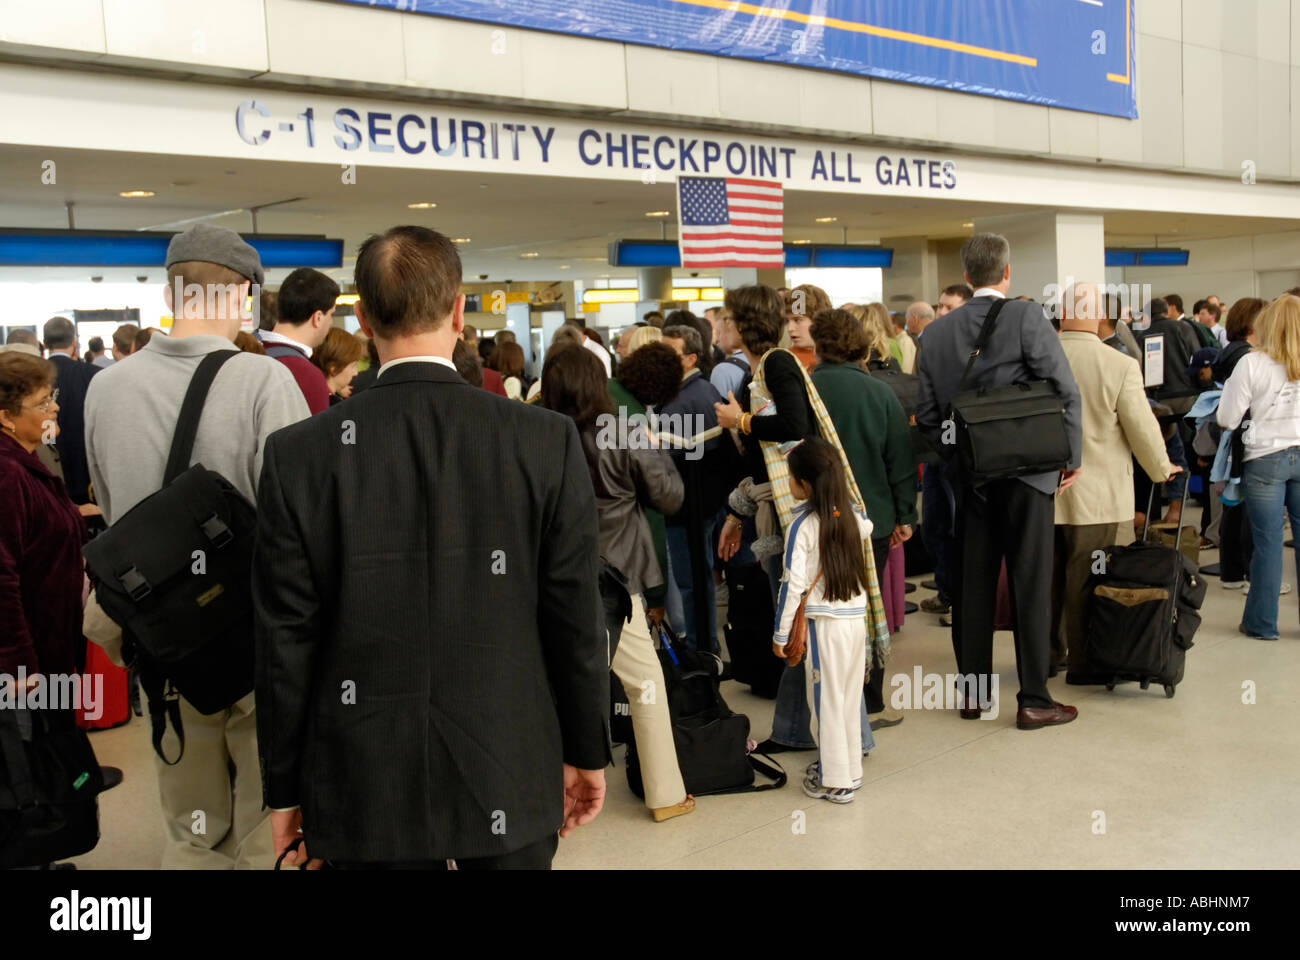 Security checkpoint line, Newark airport, NJ Stock Photo